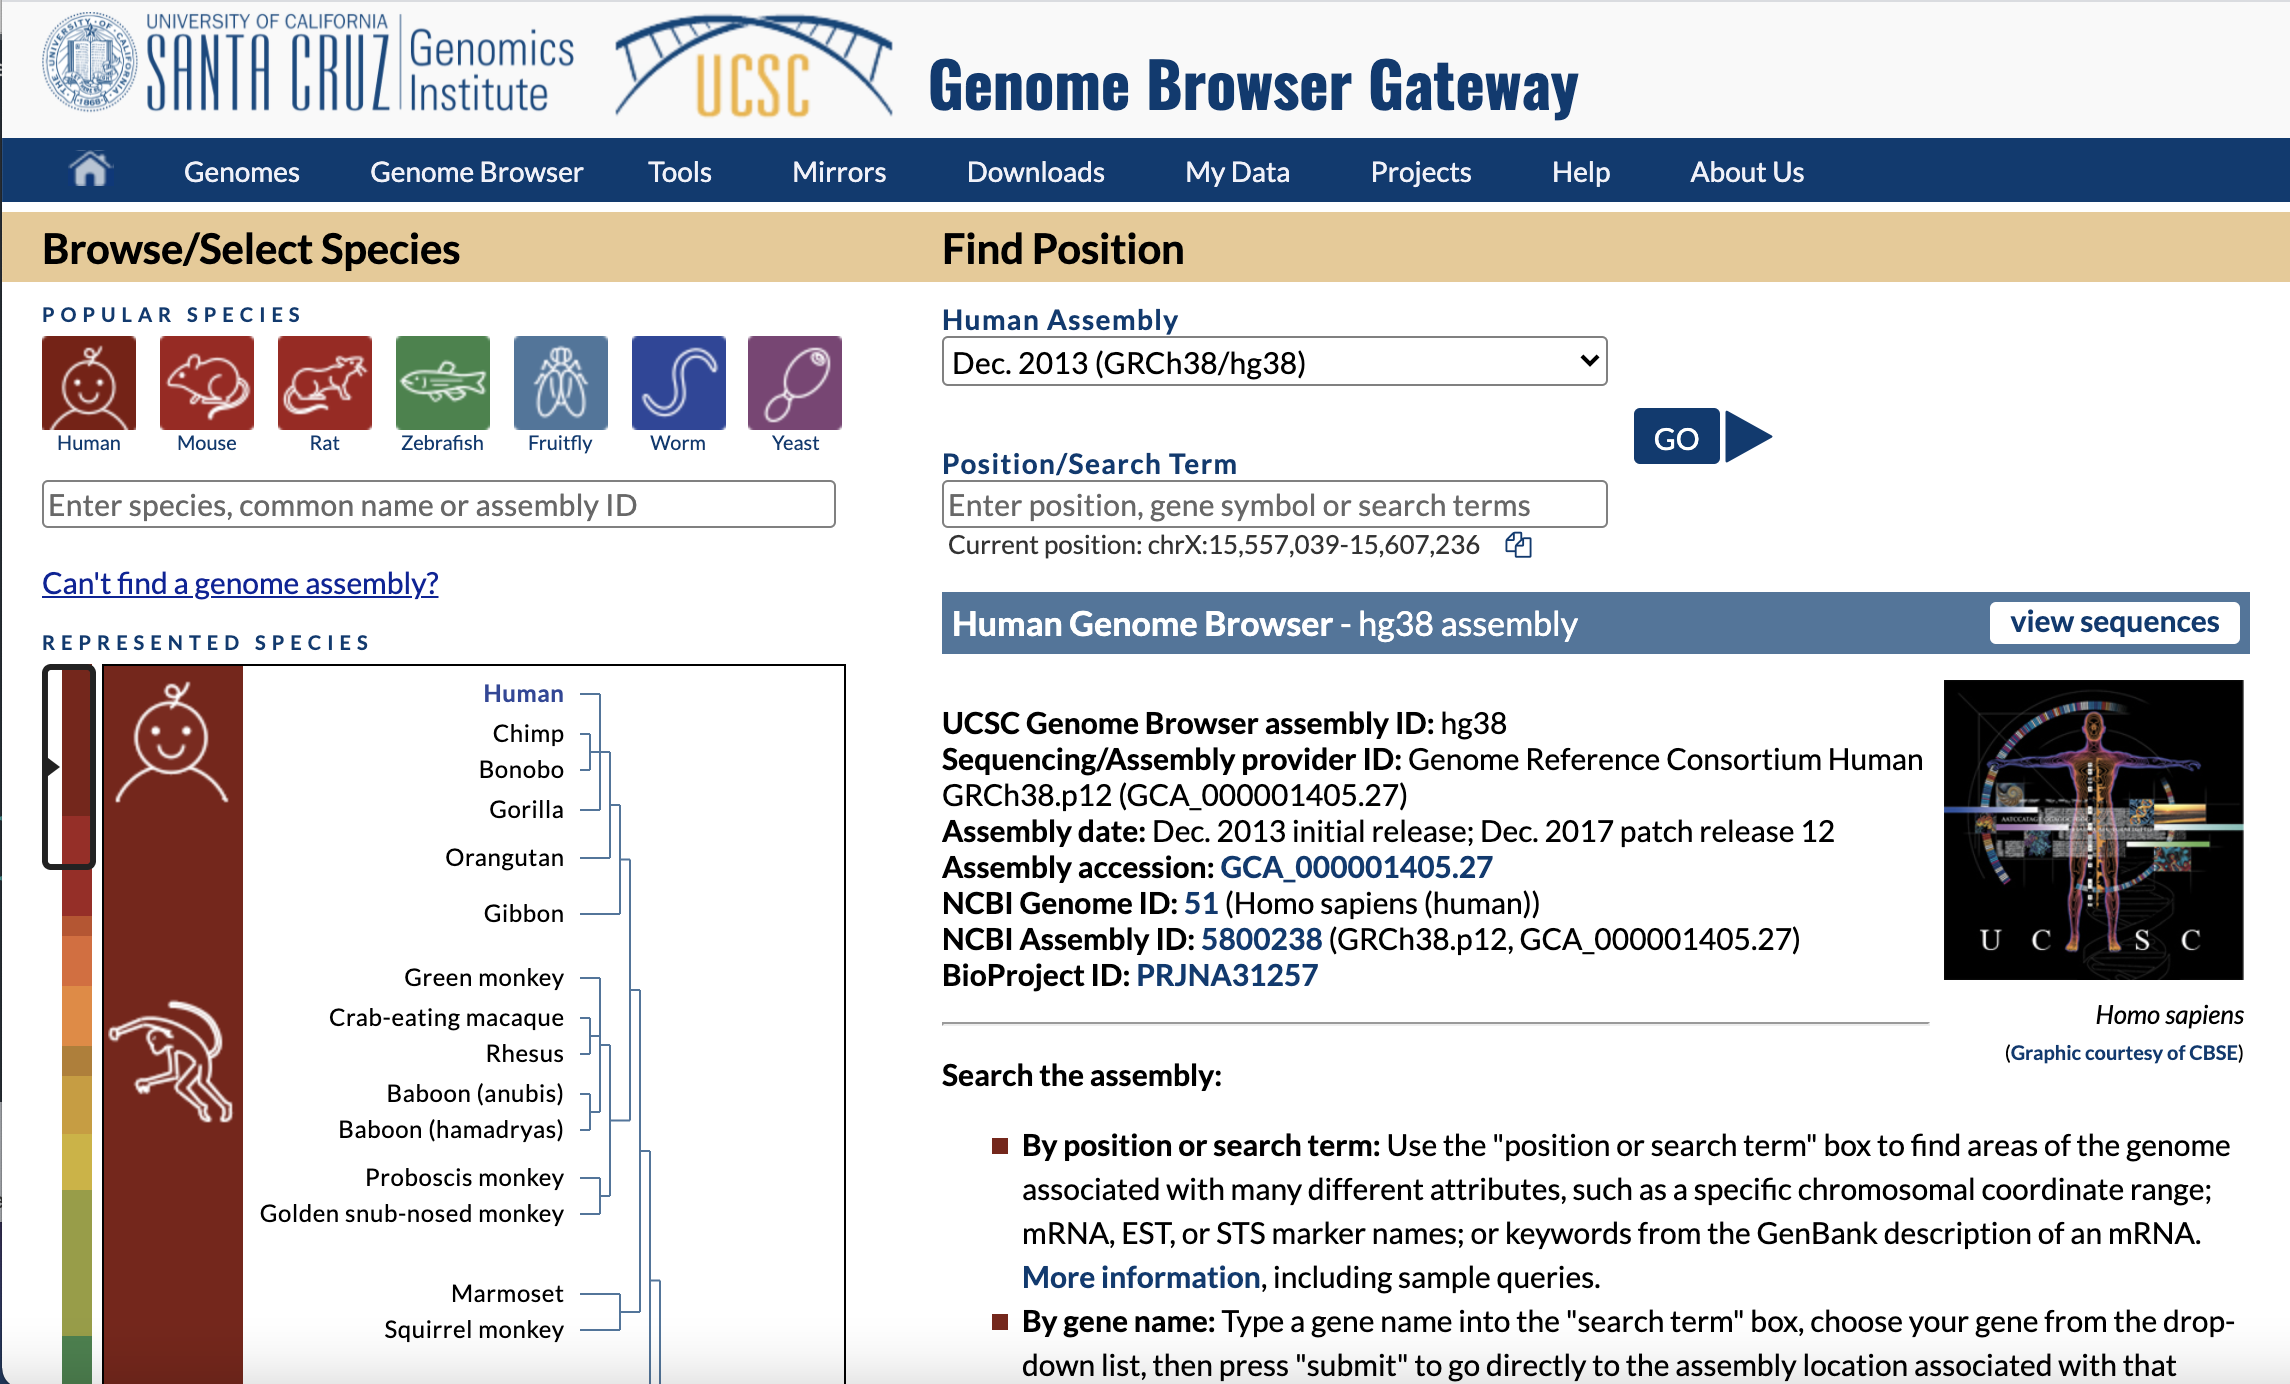 Human Genome Browser site image